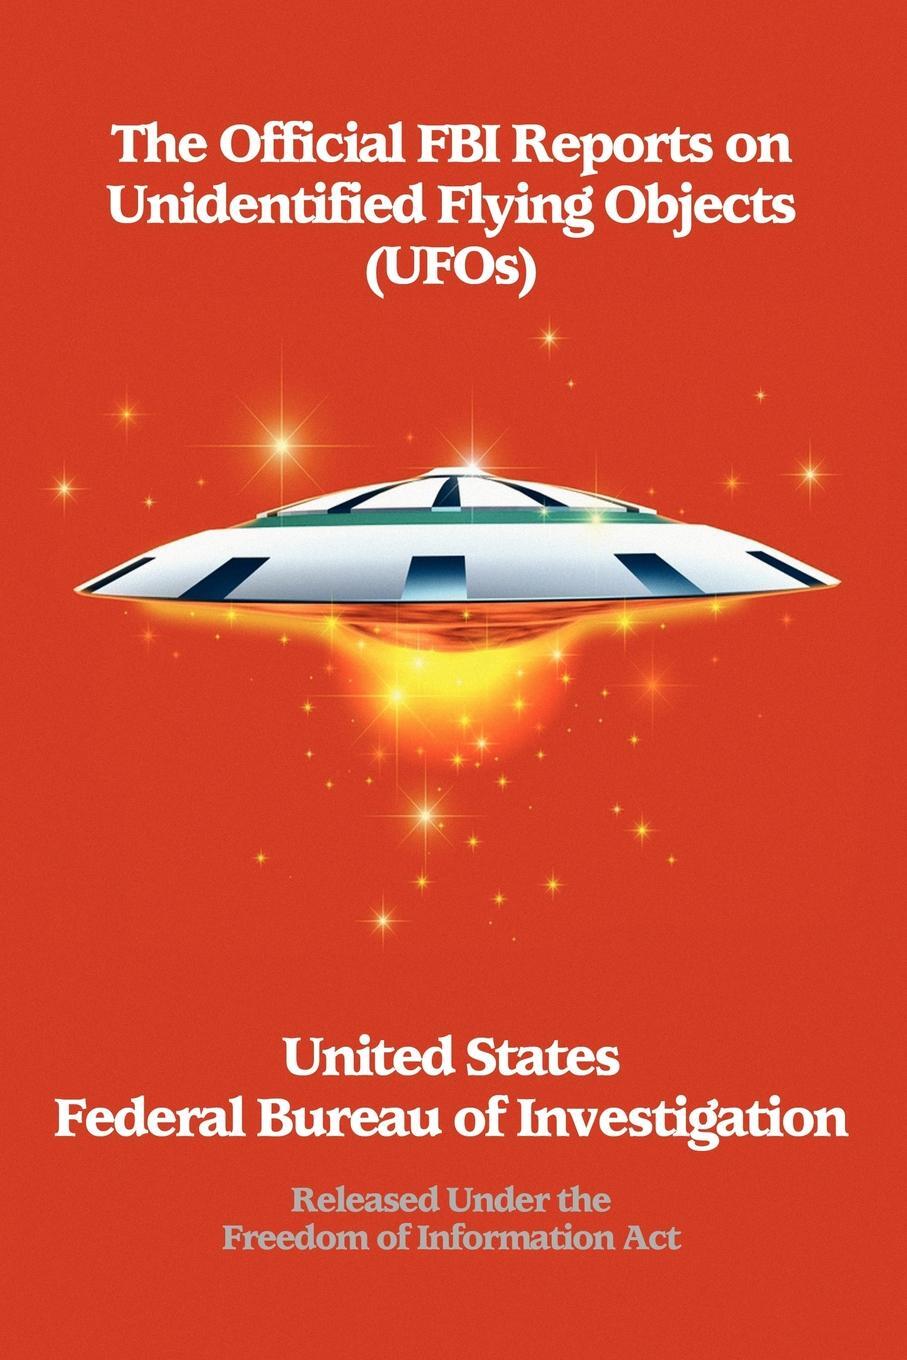 фото The Official FBI Reports on Unidentified Flying Objects (UFOs) Released Under the Freedom of Information ACT